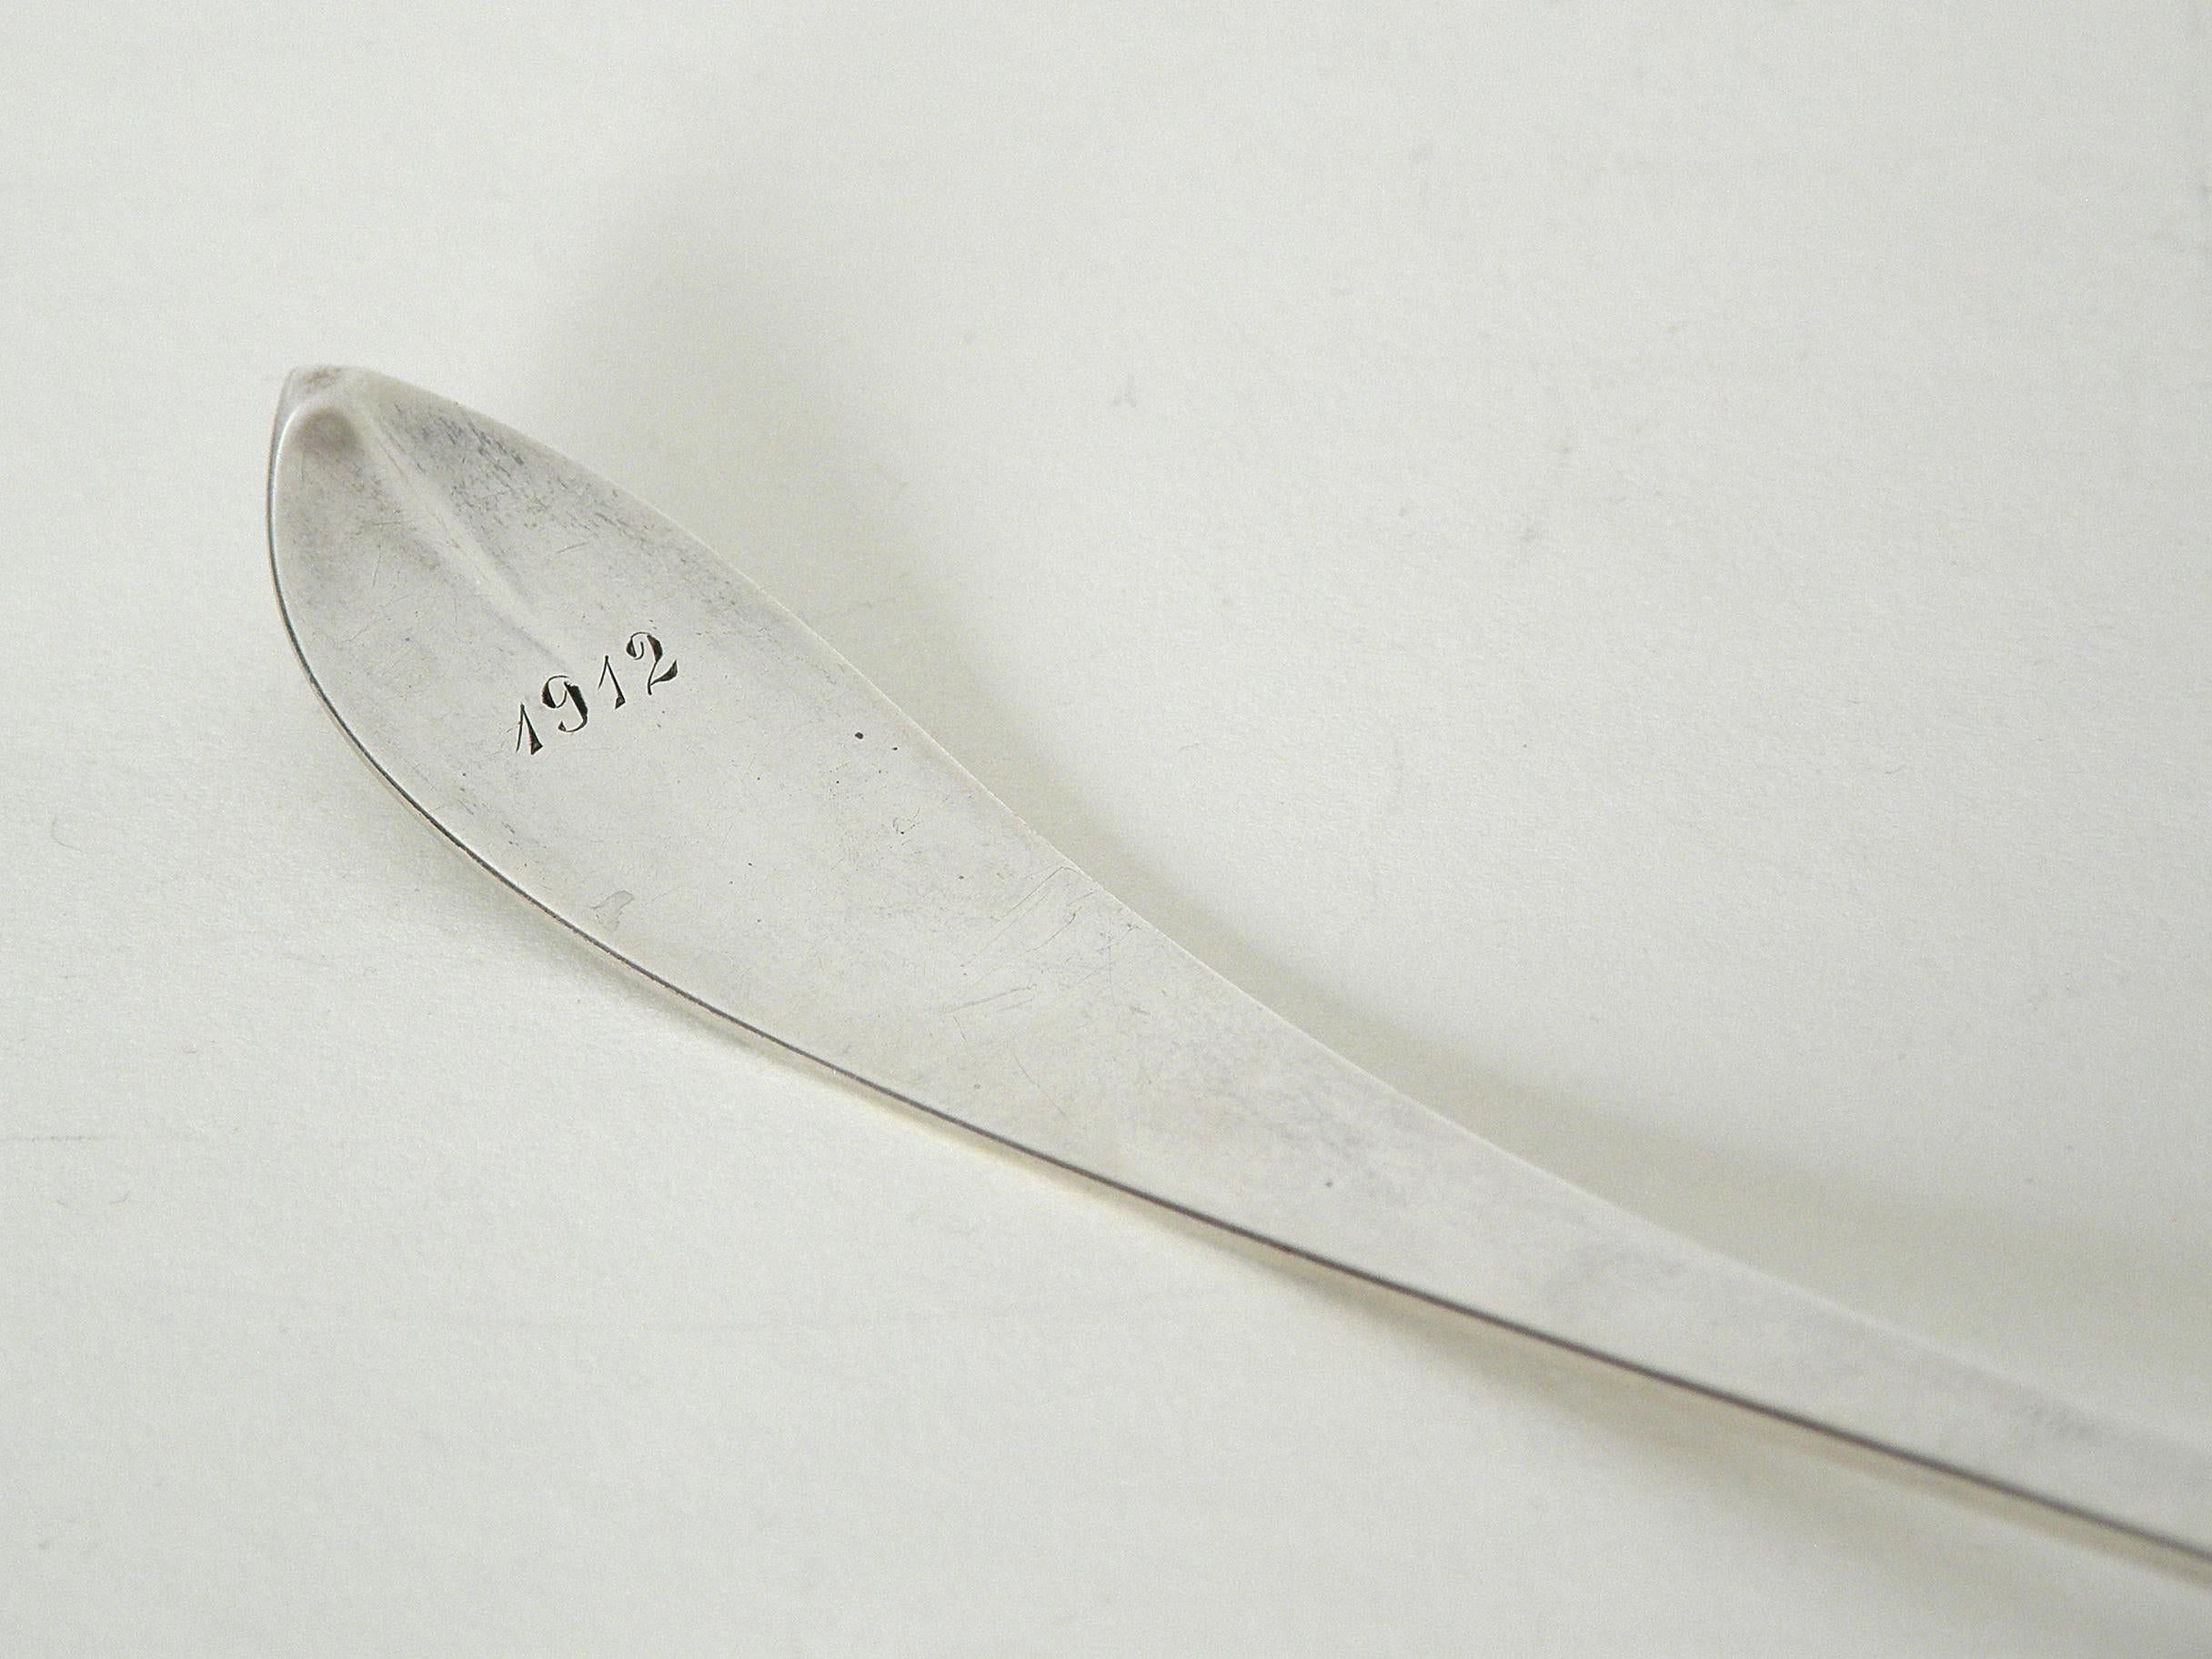 American Arthur Stone Sterling Silver Claret Ladle Spoon Cocktail Stirrer Dated 1912